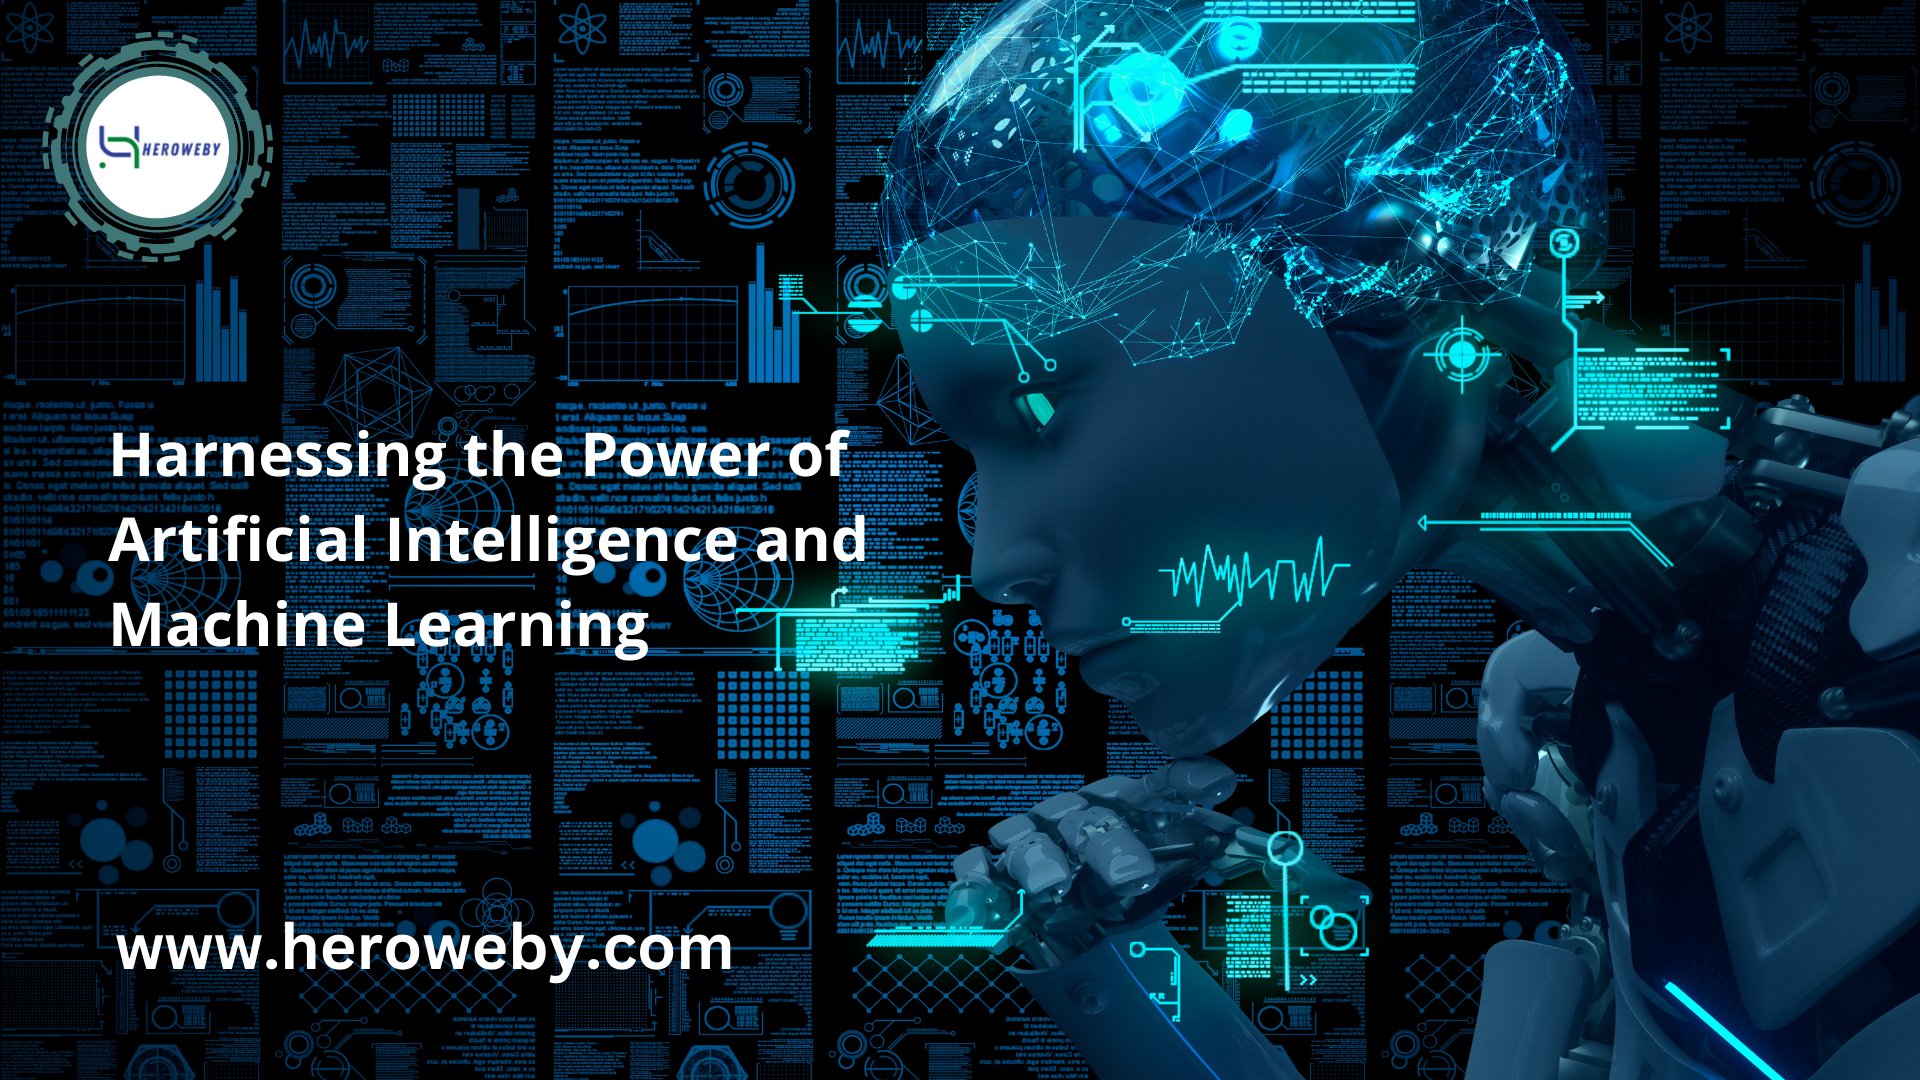 Power of Artificial Intelligence and Machine Learning